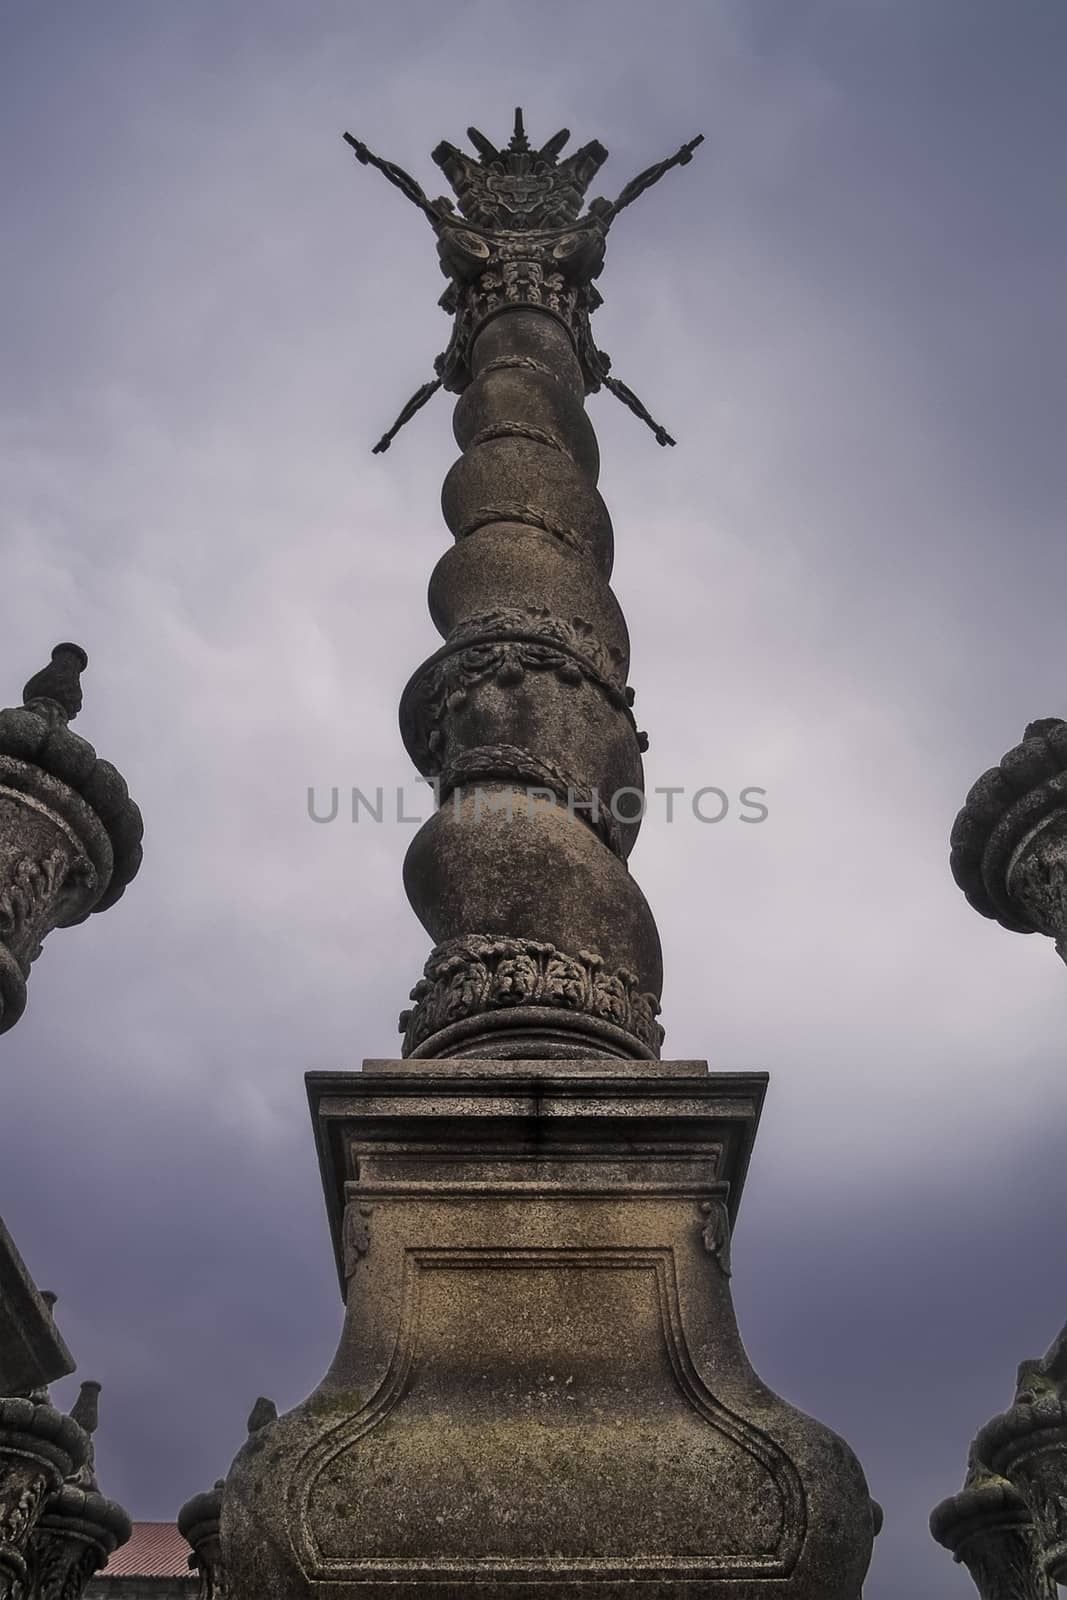 Oporto, December 2012. Solomonic column outside the Oporto cathedral. XII - XIII centuries in romanesque style. Alteration in XVIII century on baroque style. Oporto downtown is UNESCO World Heritage site.